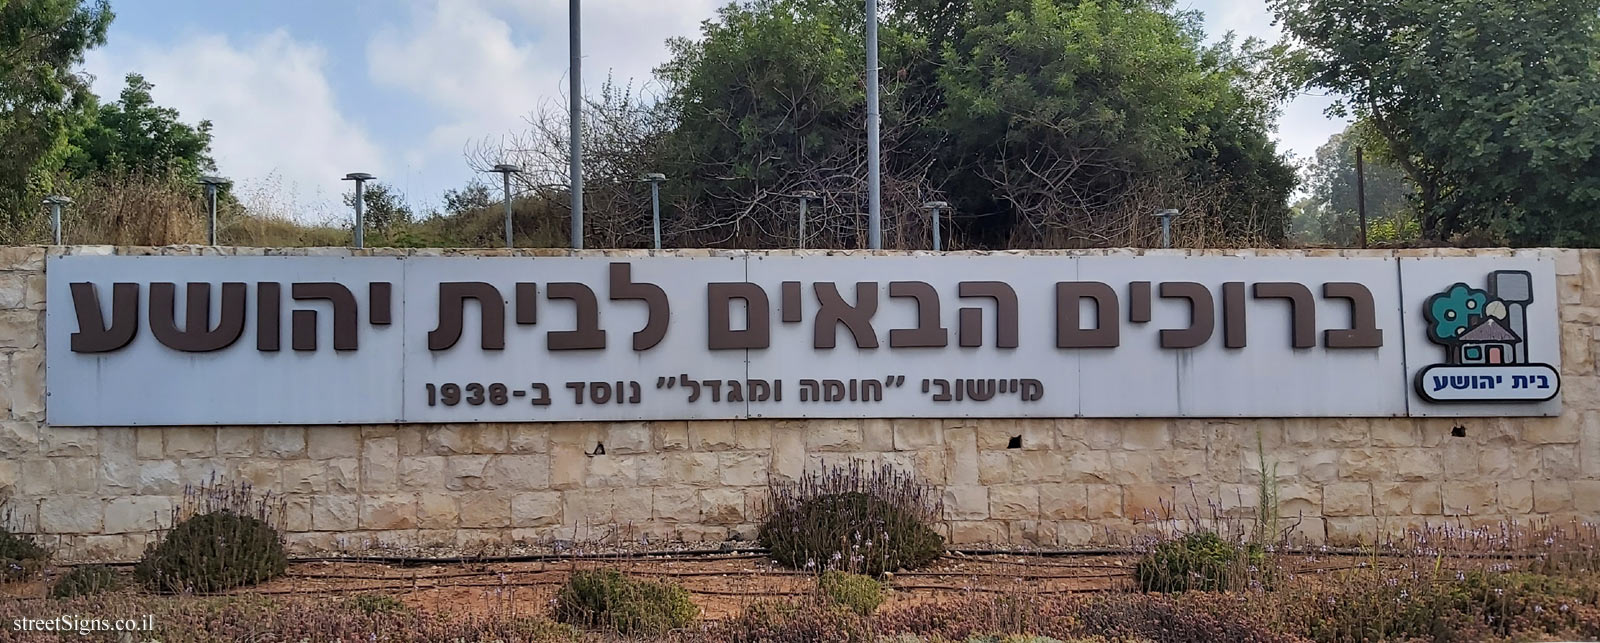 Beit Yehoshua - the entrance sign to the moshav